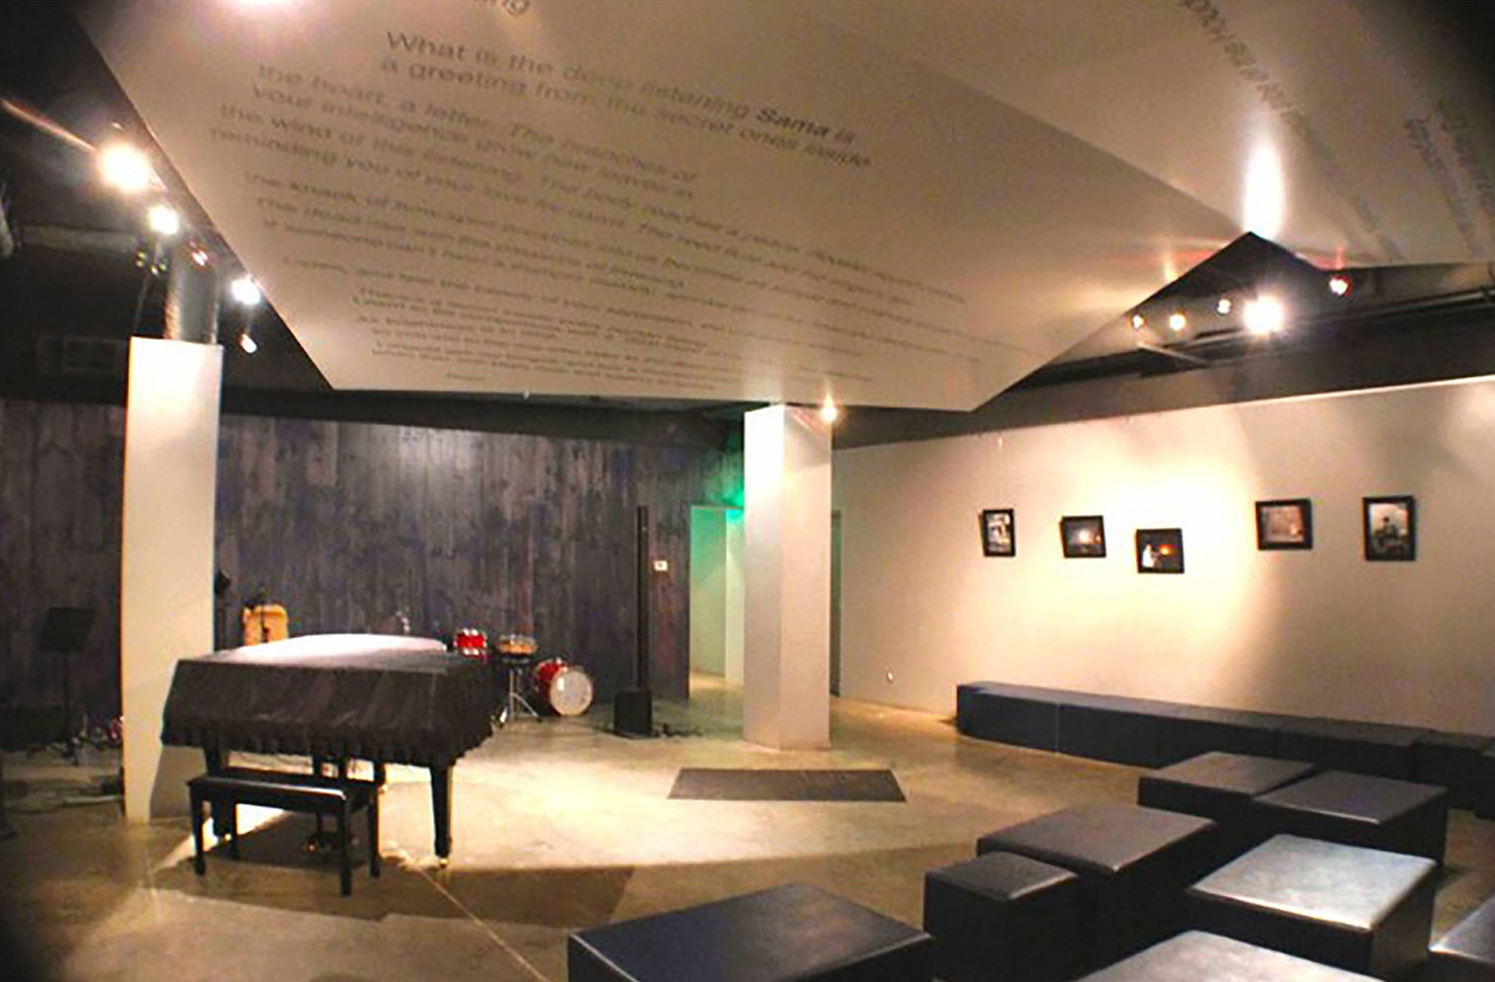 Art gallery room with a covered piano